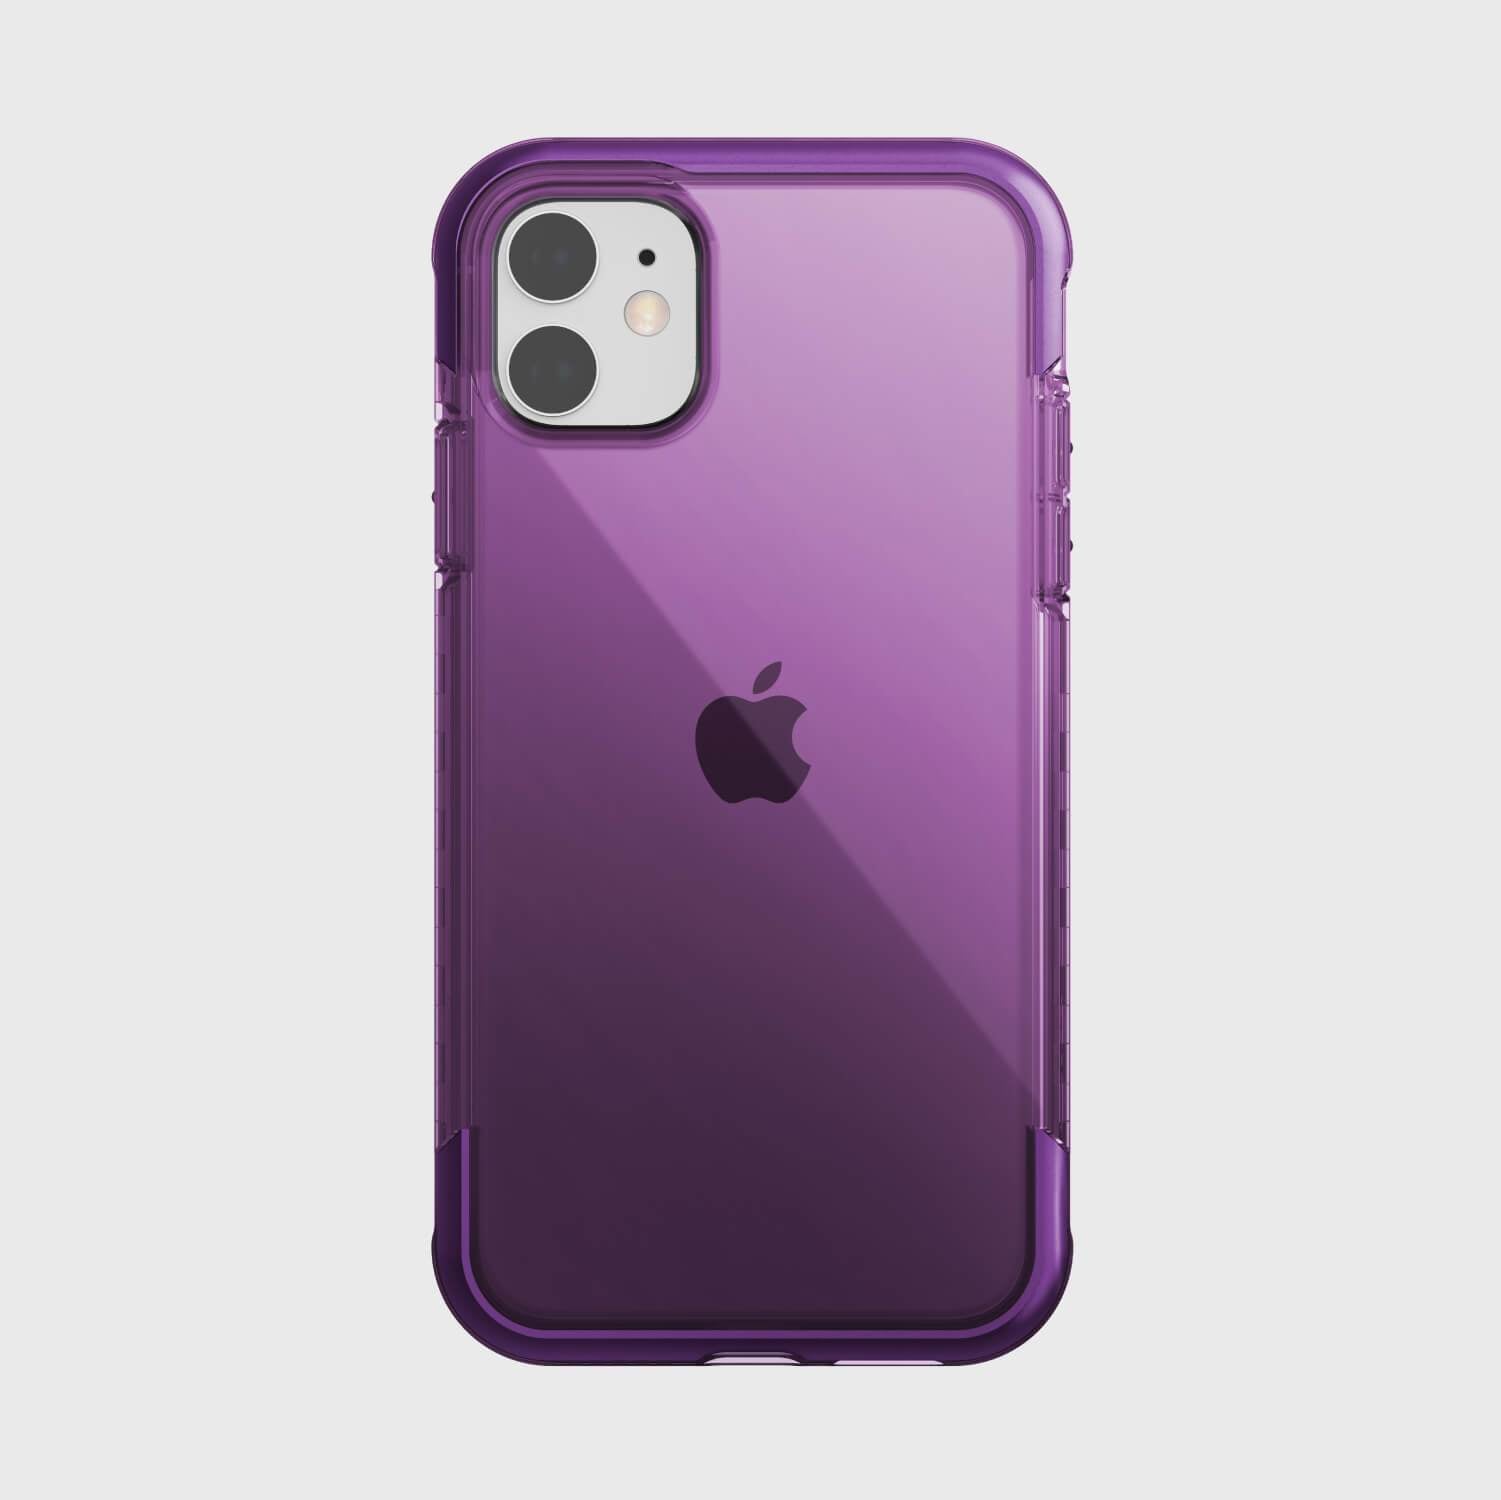 The purple iPhone 11 Pro Max Case - AIR (Raptic) is shown on a white background.